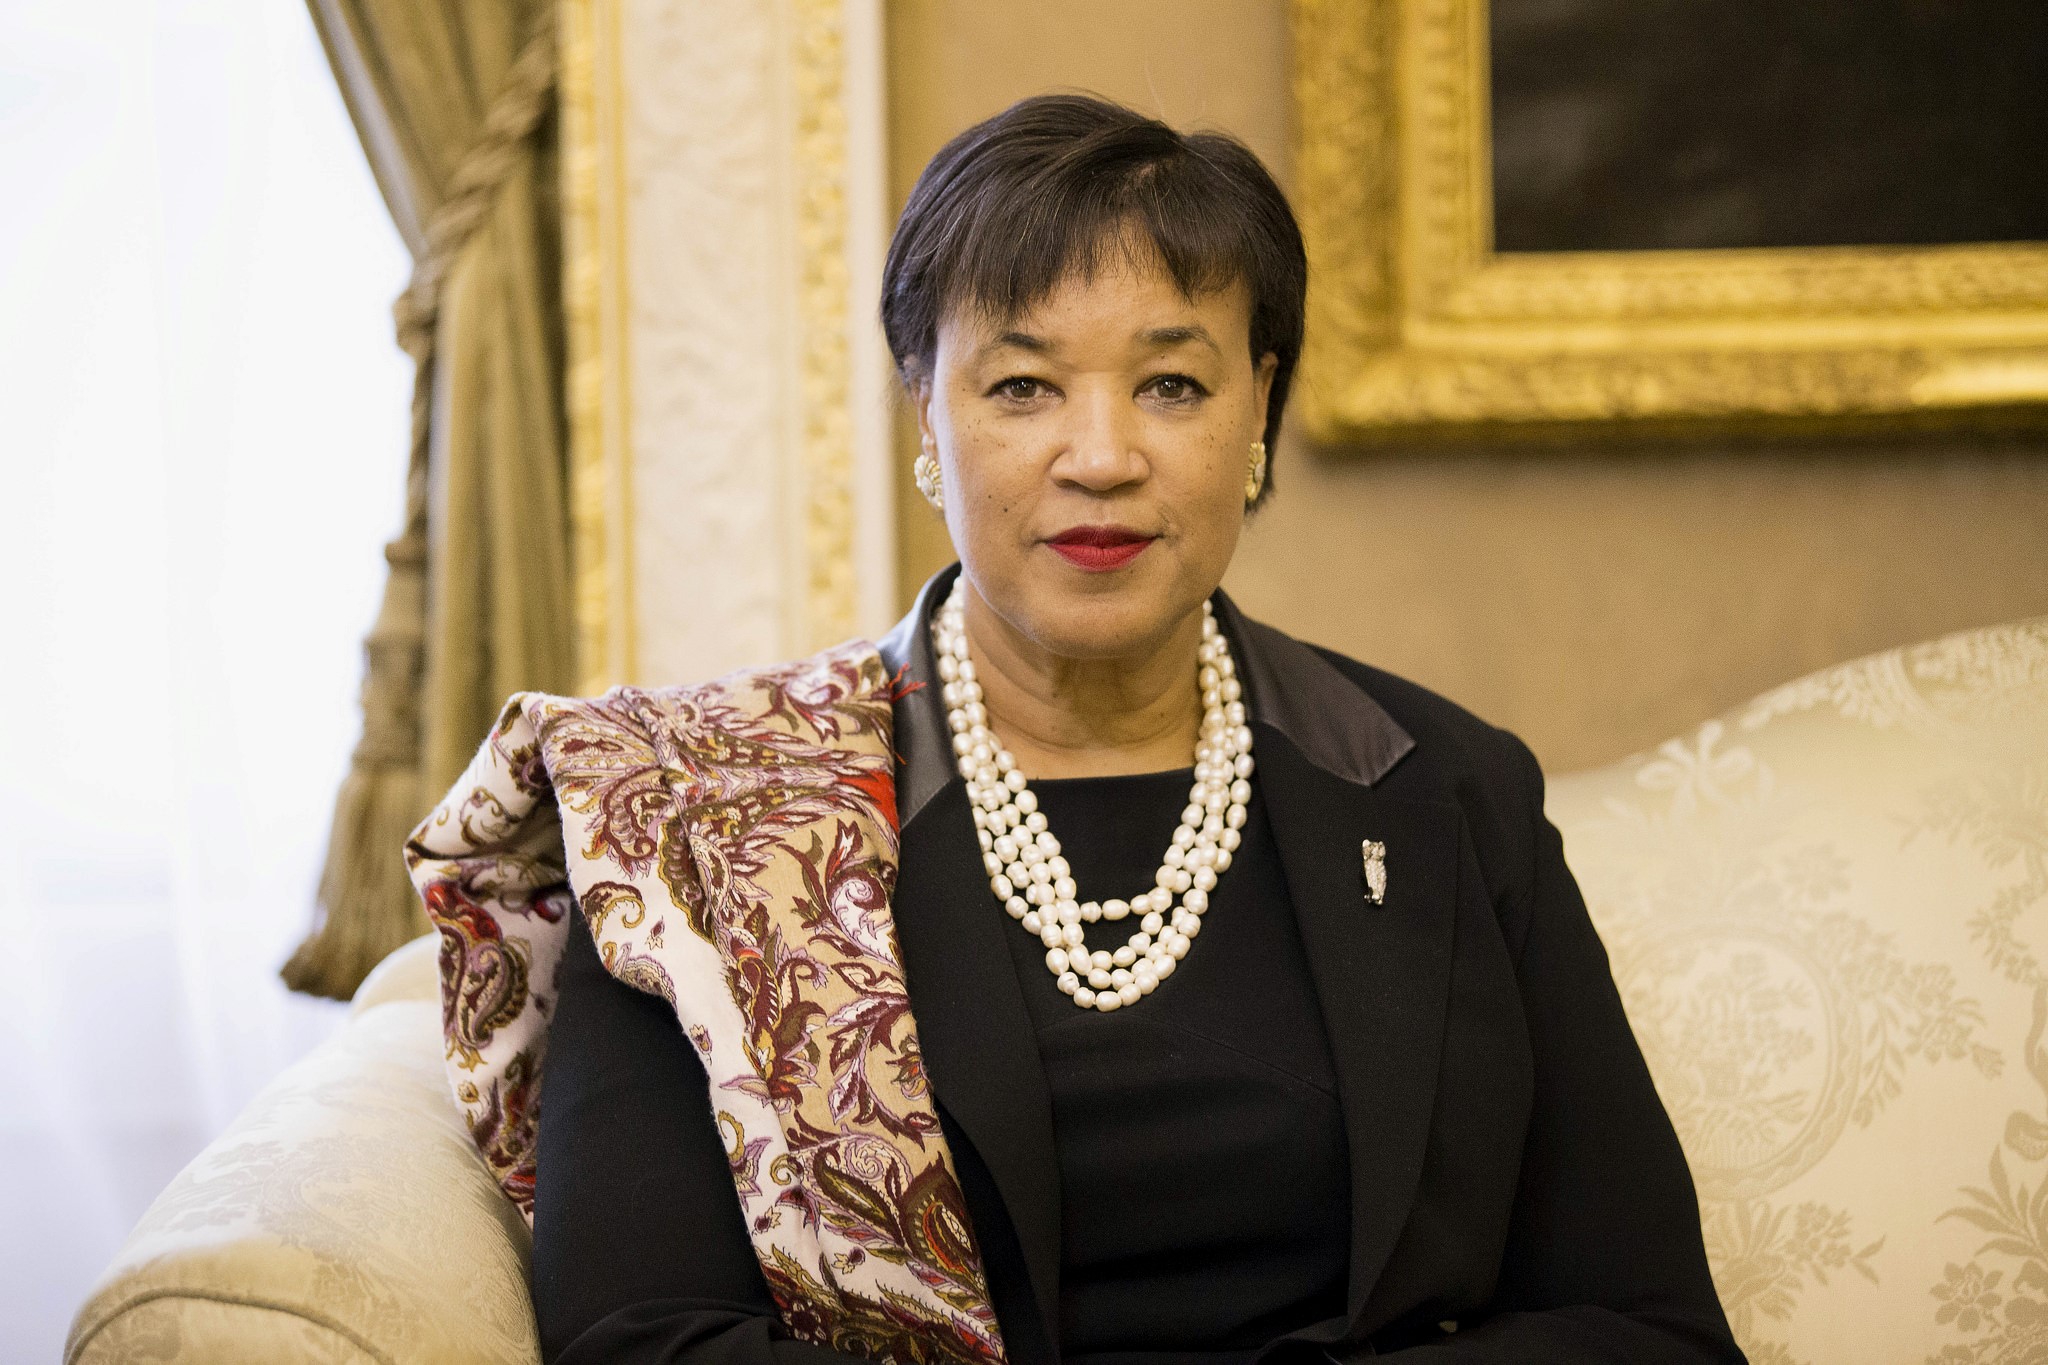 Commonwealth Secretary-General: We should not go back to business as usual after COVID-19